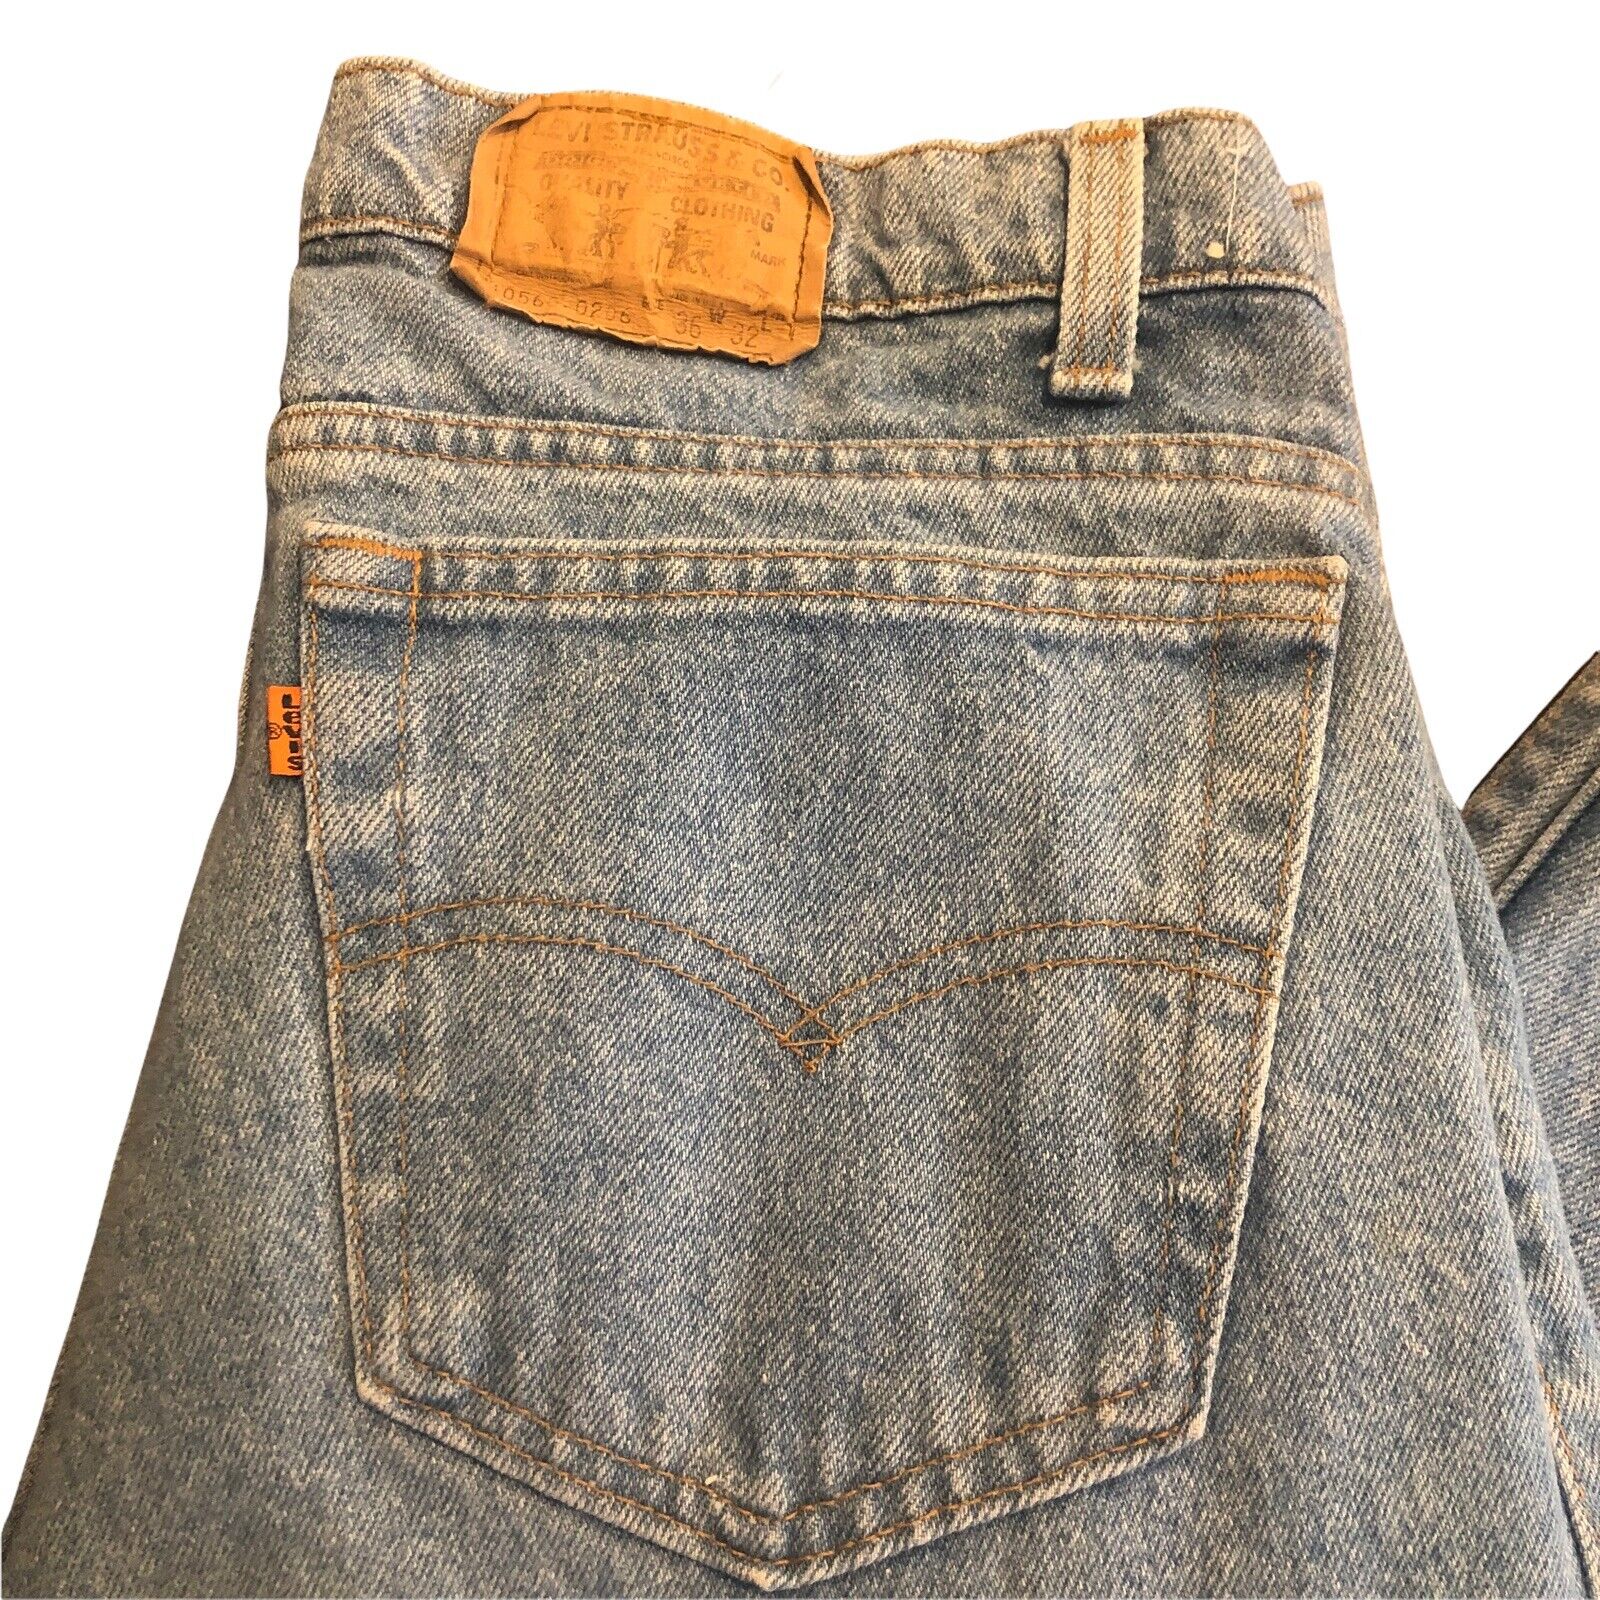 Levis 560 Woman's 36x32 Orange Tag Tapered Pleated Denim Jeans Y2K RARE USA